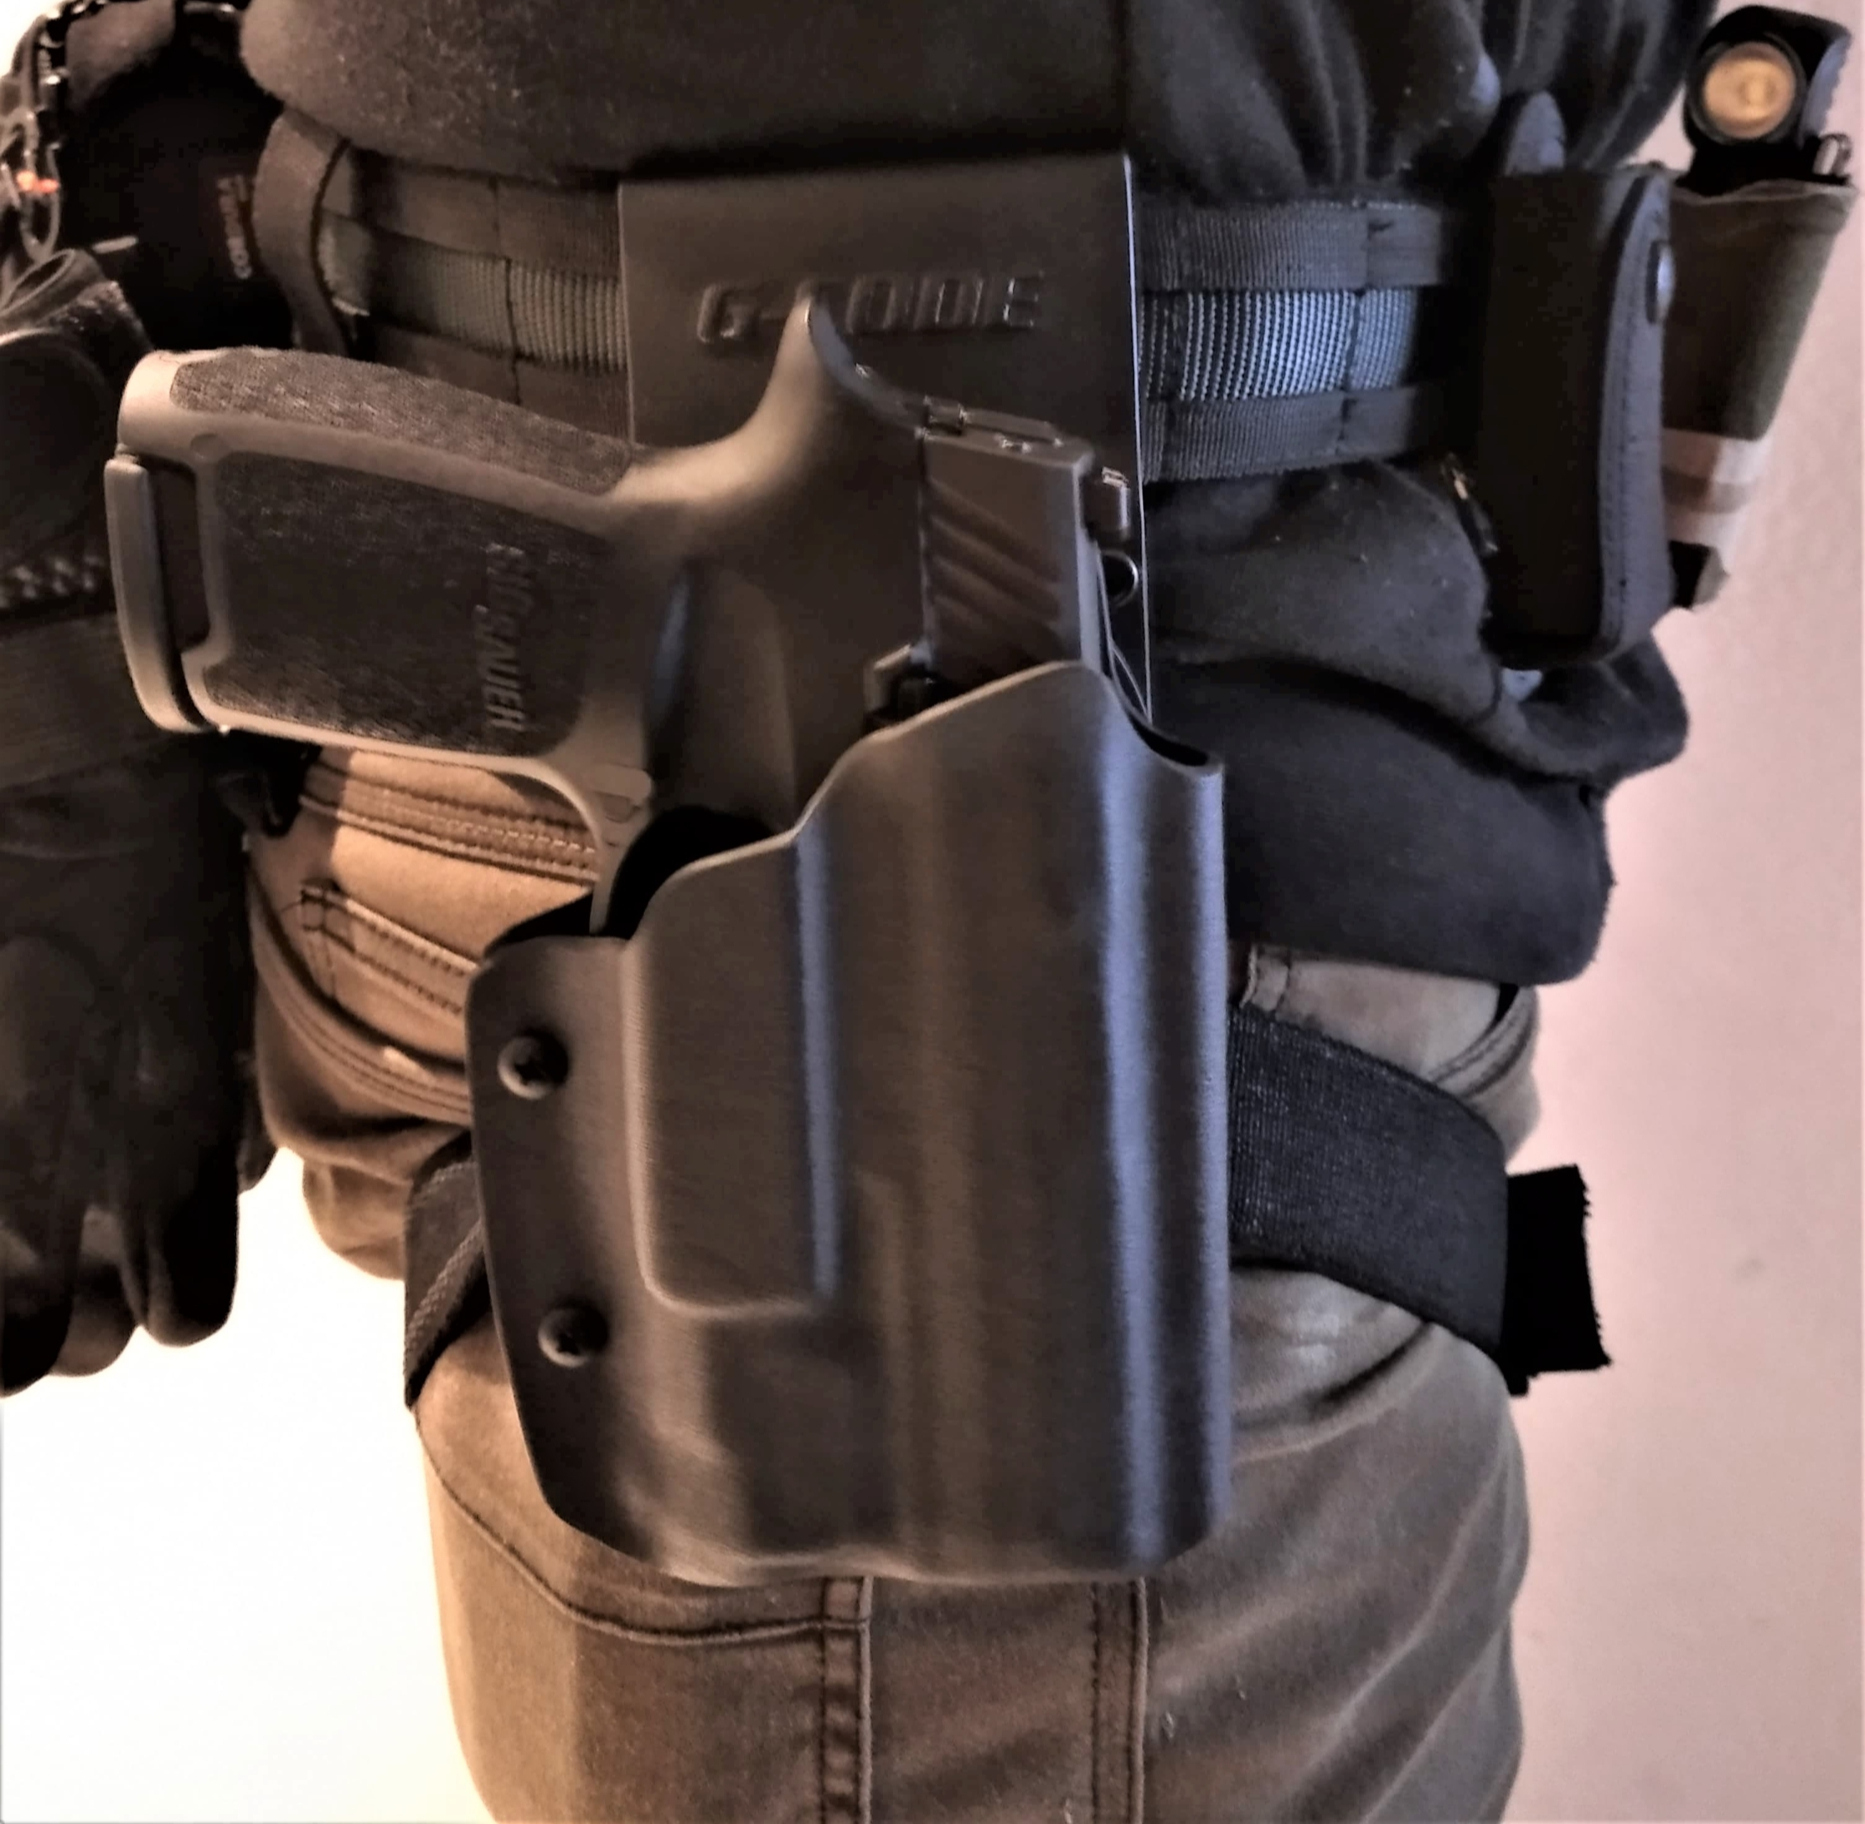 holster etfr kydex p320 compact inforce APL C lampe france RTI G code